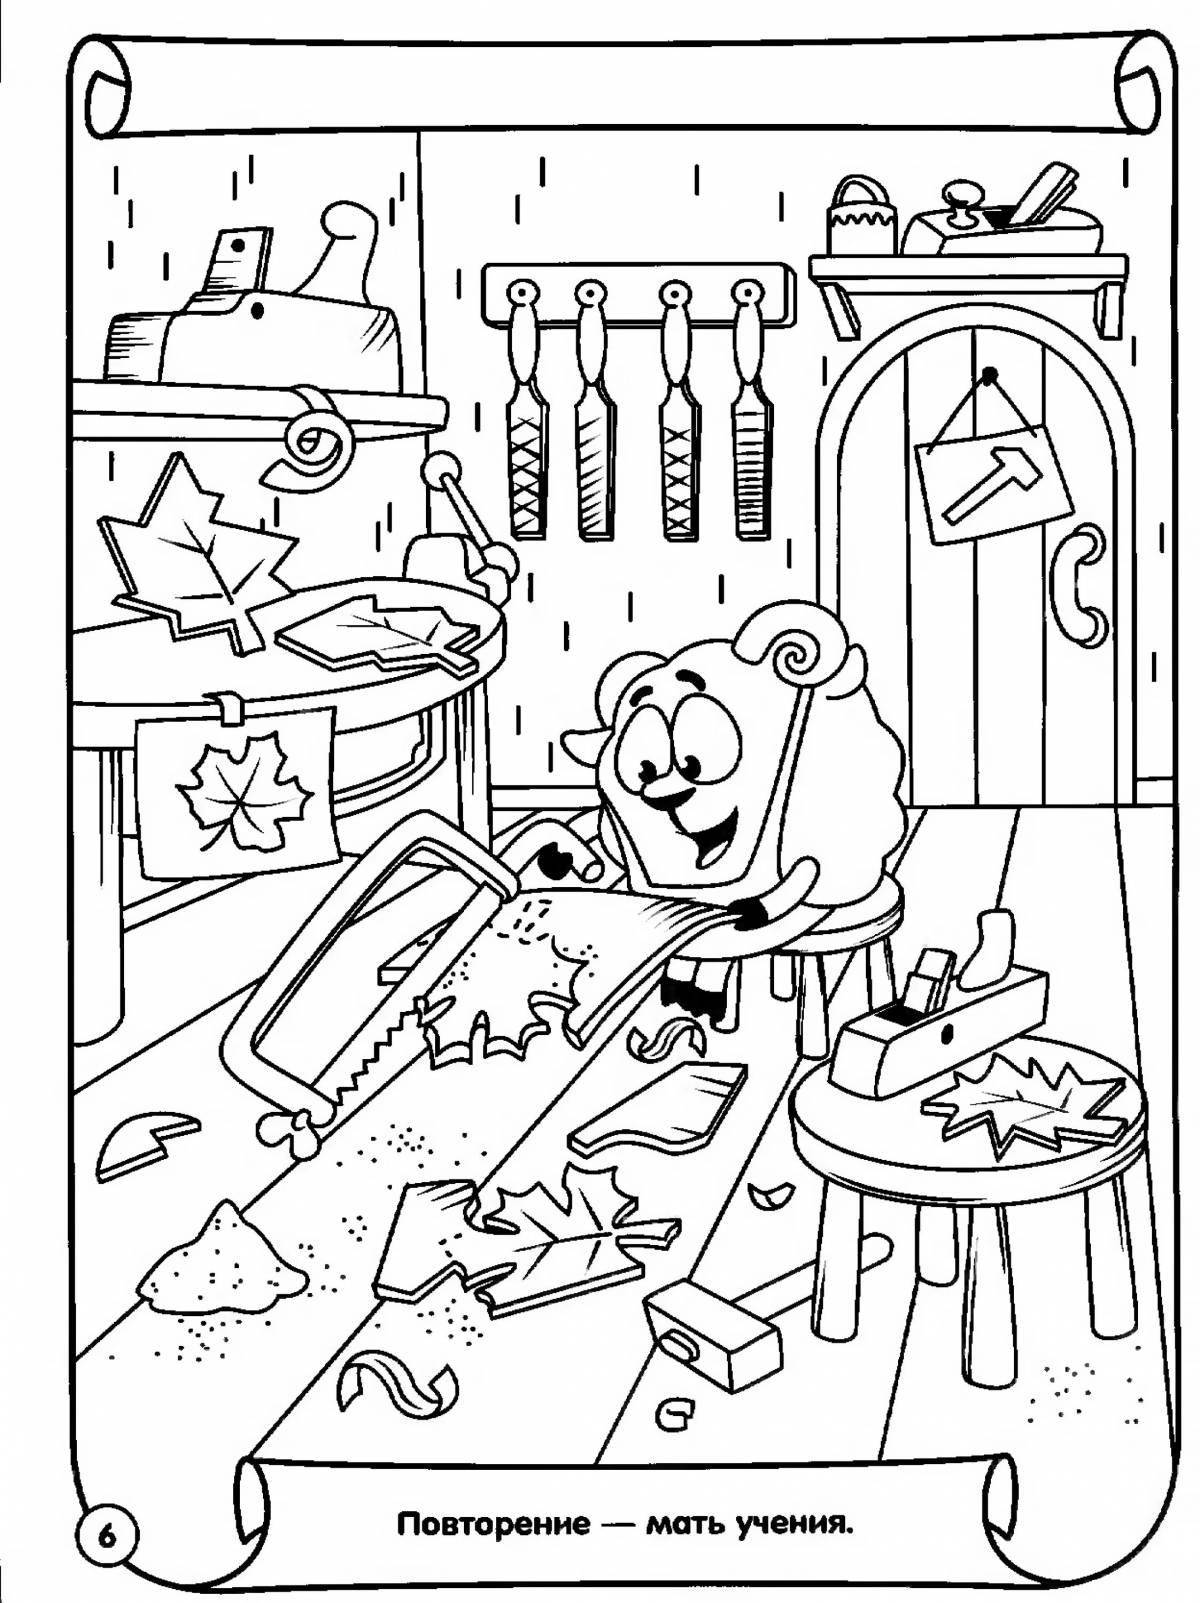 Coloring book intriguing proverbs